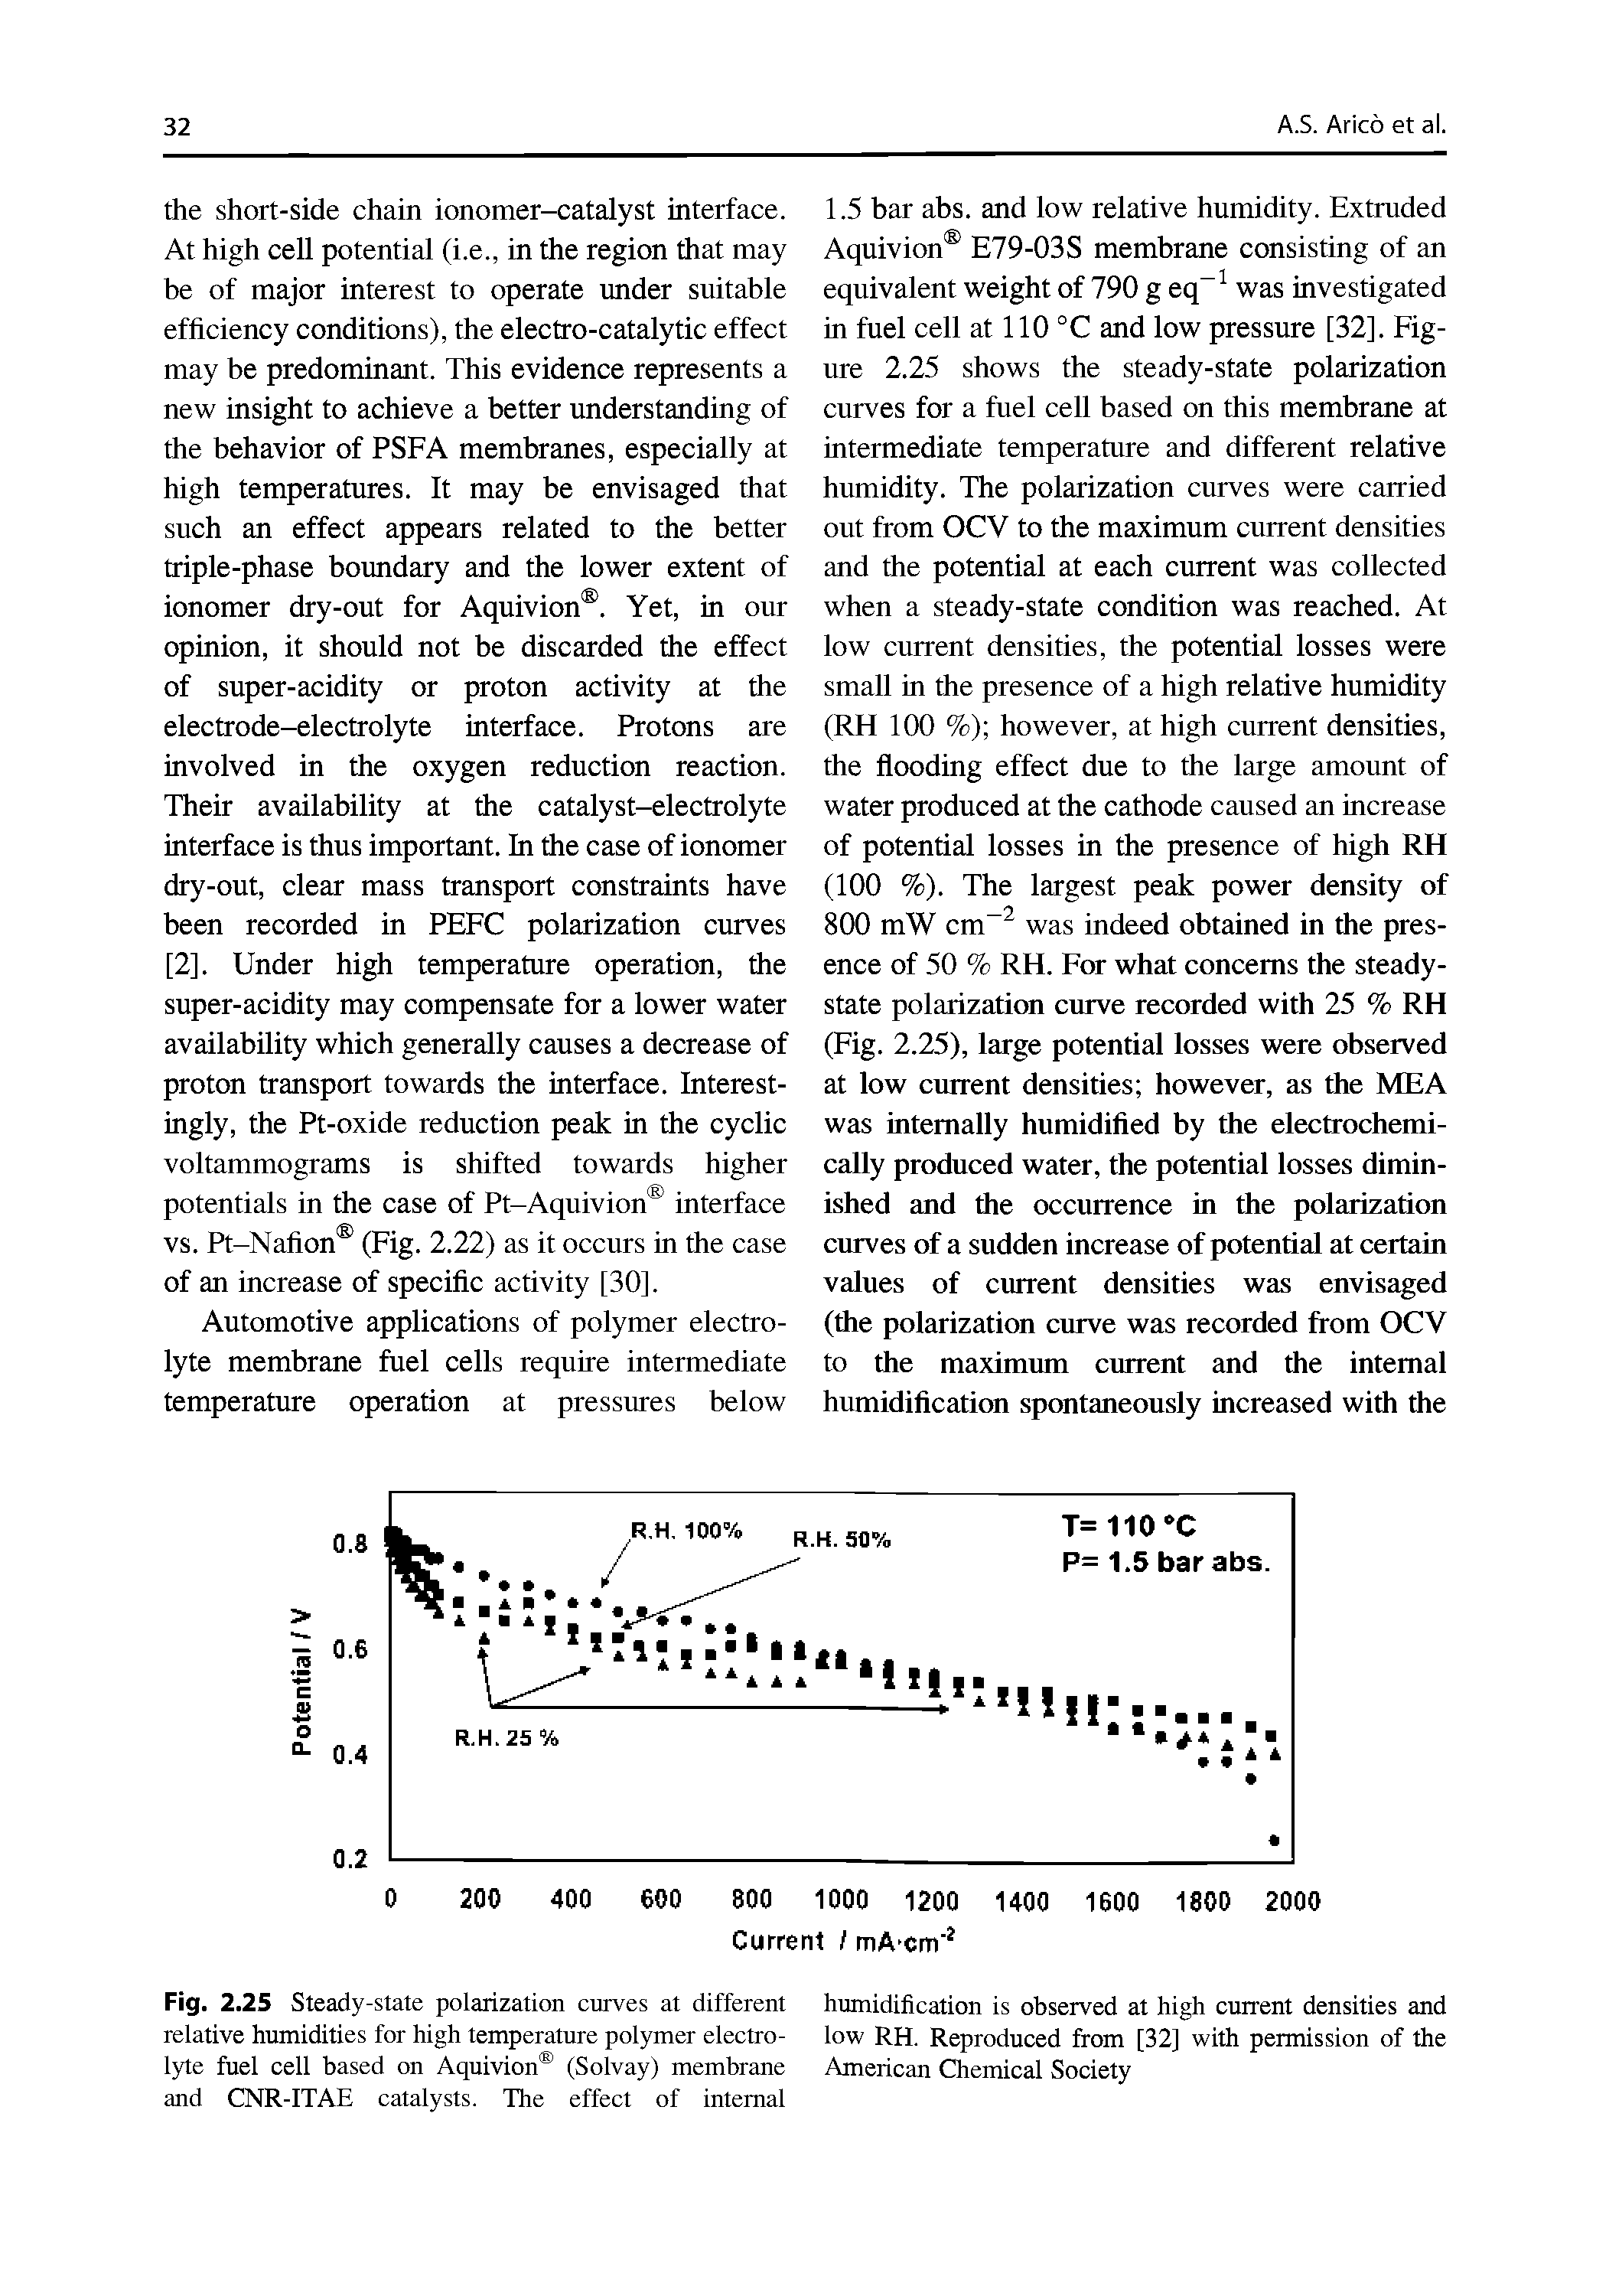 Fig. 2.25 Steady-state polarization curves at different humidification is observed at high current densities and relative humidities for high temperature polymer electro- low RH. Reproduced from [32] with permission of the lyte fuel cell based on Aquivion (Solvay) membrane American Chemical Society and CNR-ITAE catalysts. The effect of internal...